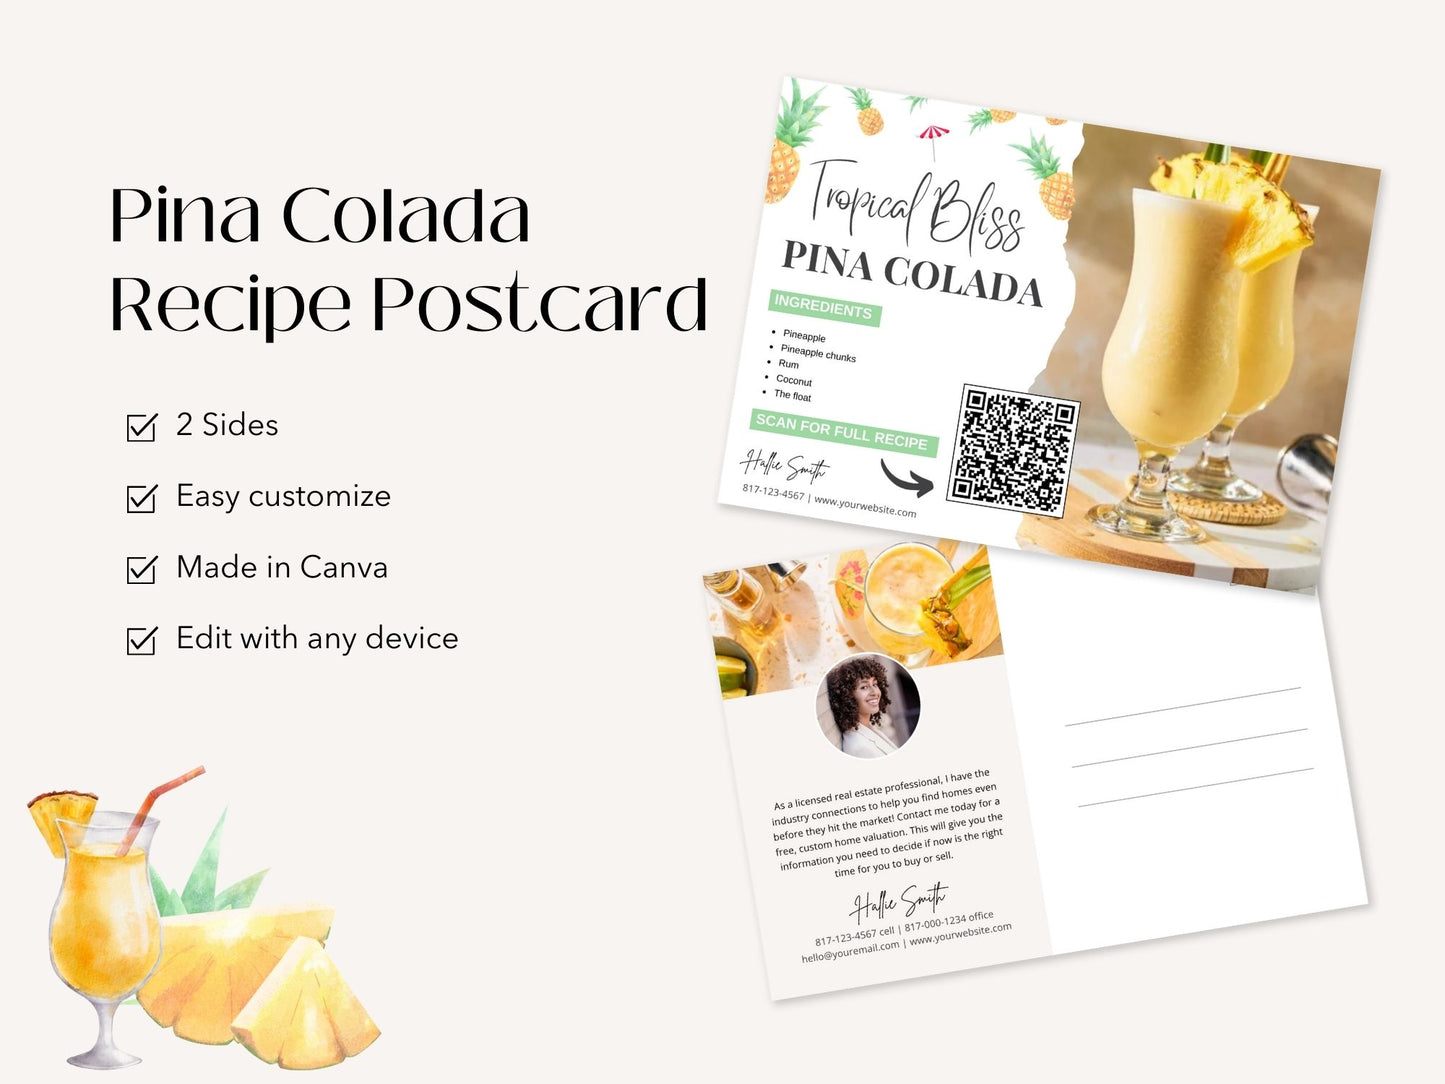 Pina Colada Recipe Postcard - Transport your clients to a tropical escape with a delightful postcard sharing the classic cocktail recipe. Cheers to memorable moments in real estate!